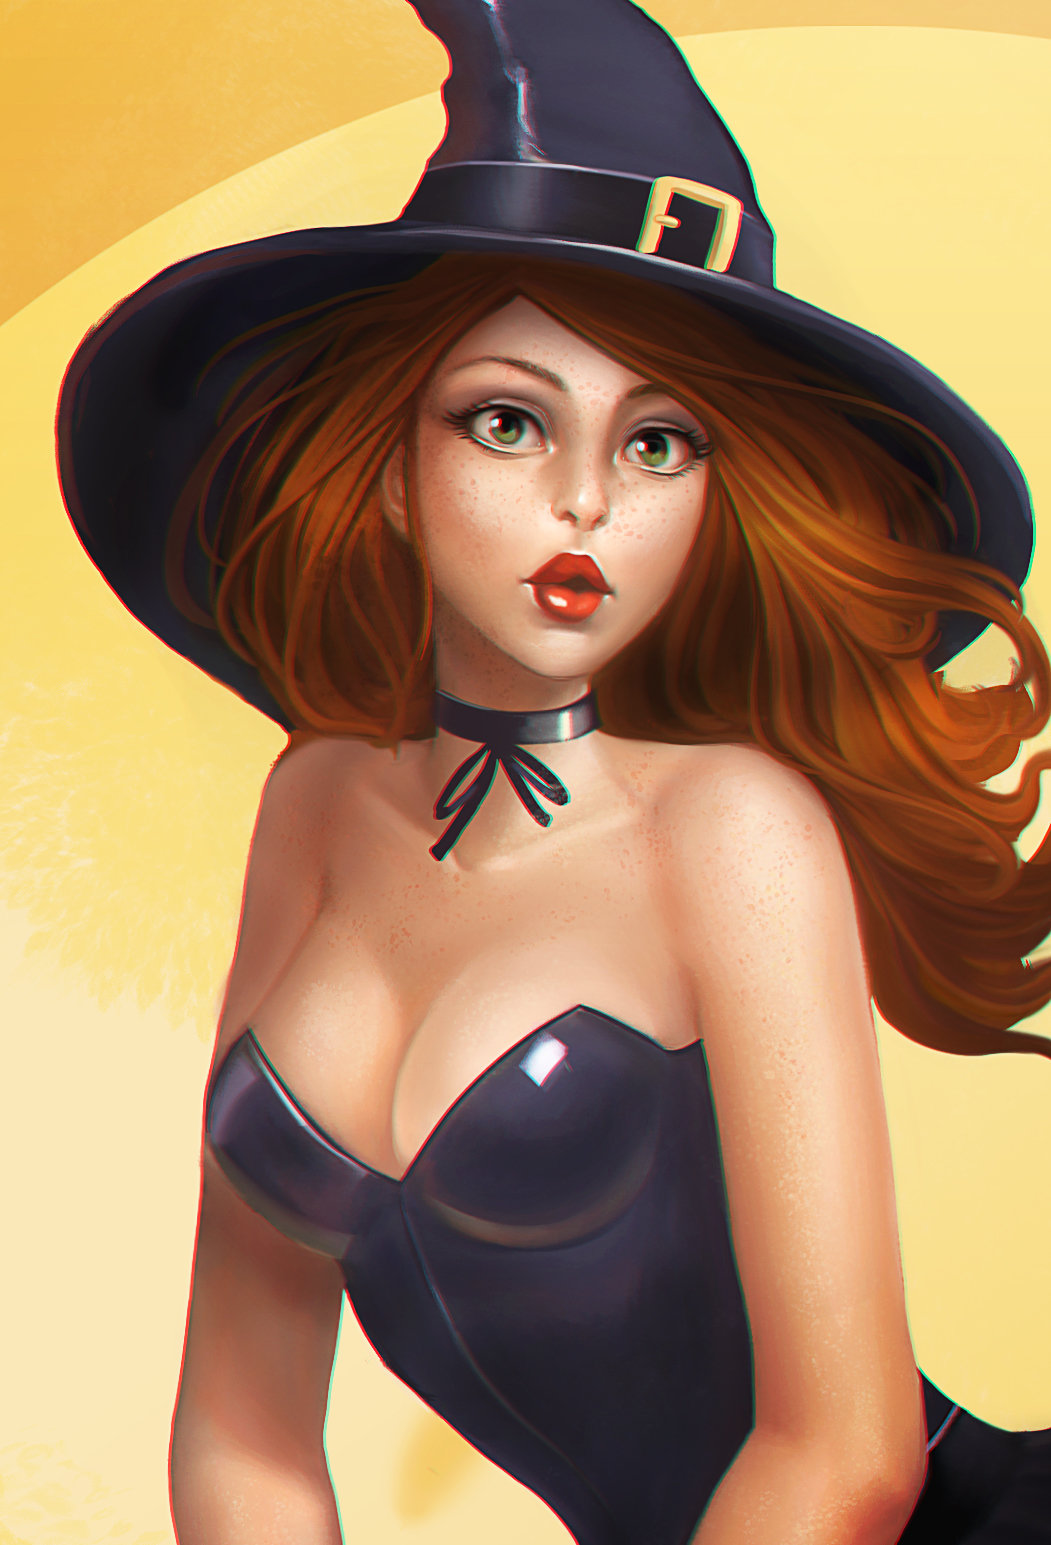 Pinup witch.